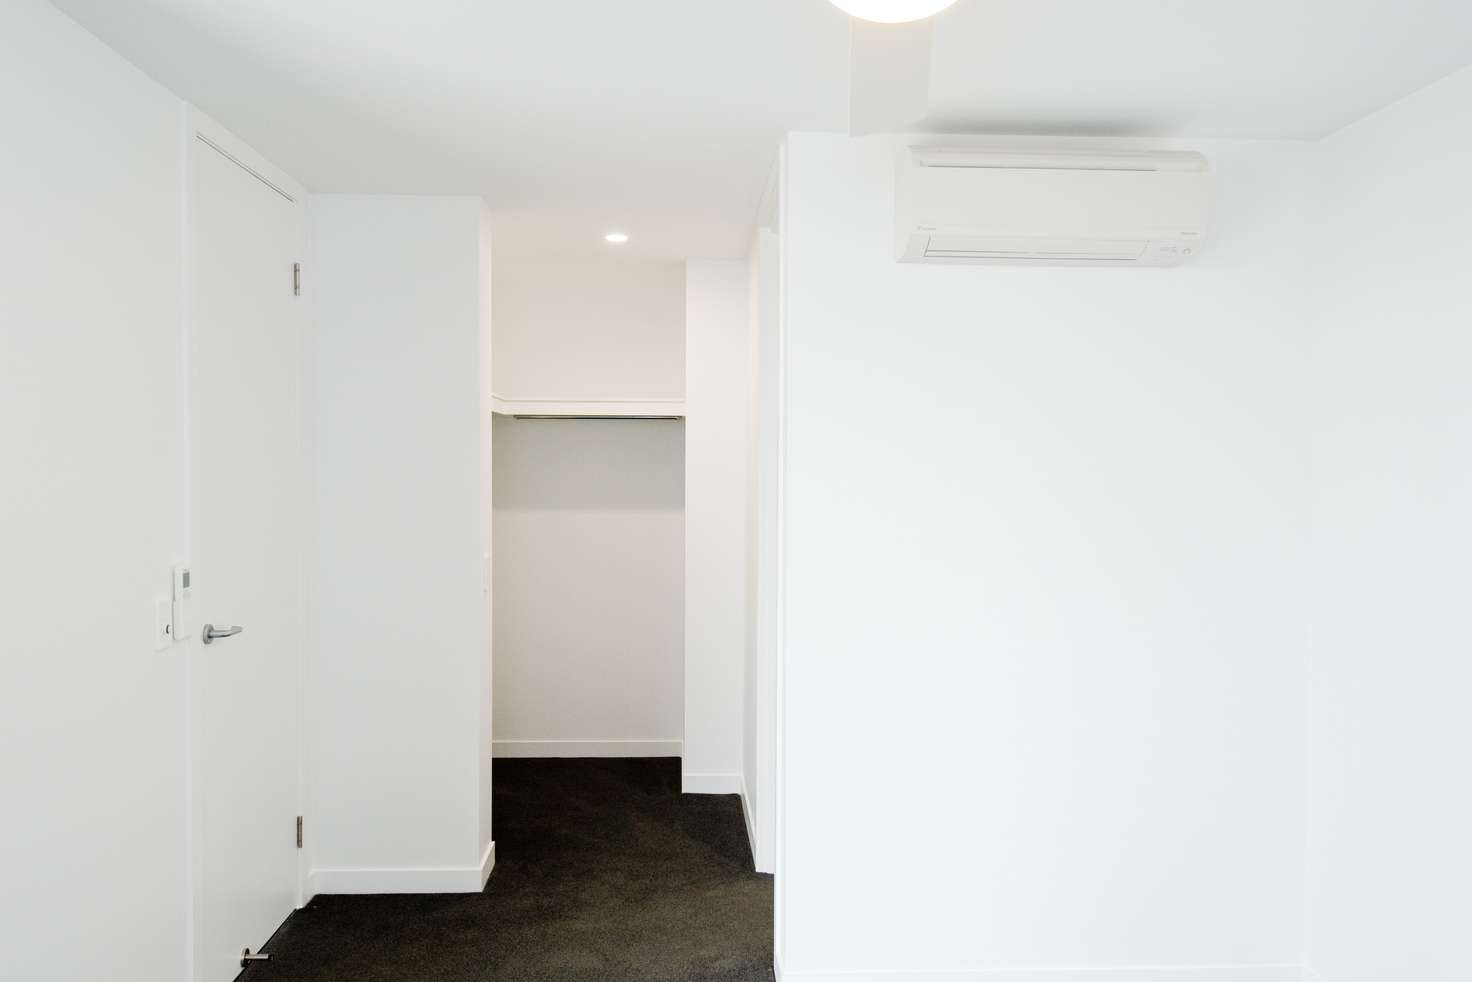 Main view of Homely apartment listing, 309/18-26 Mermaid Street, Chermside QLD 4032